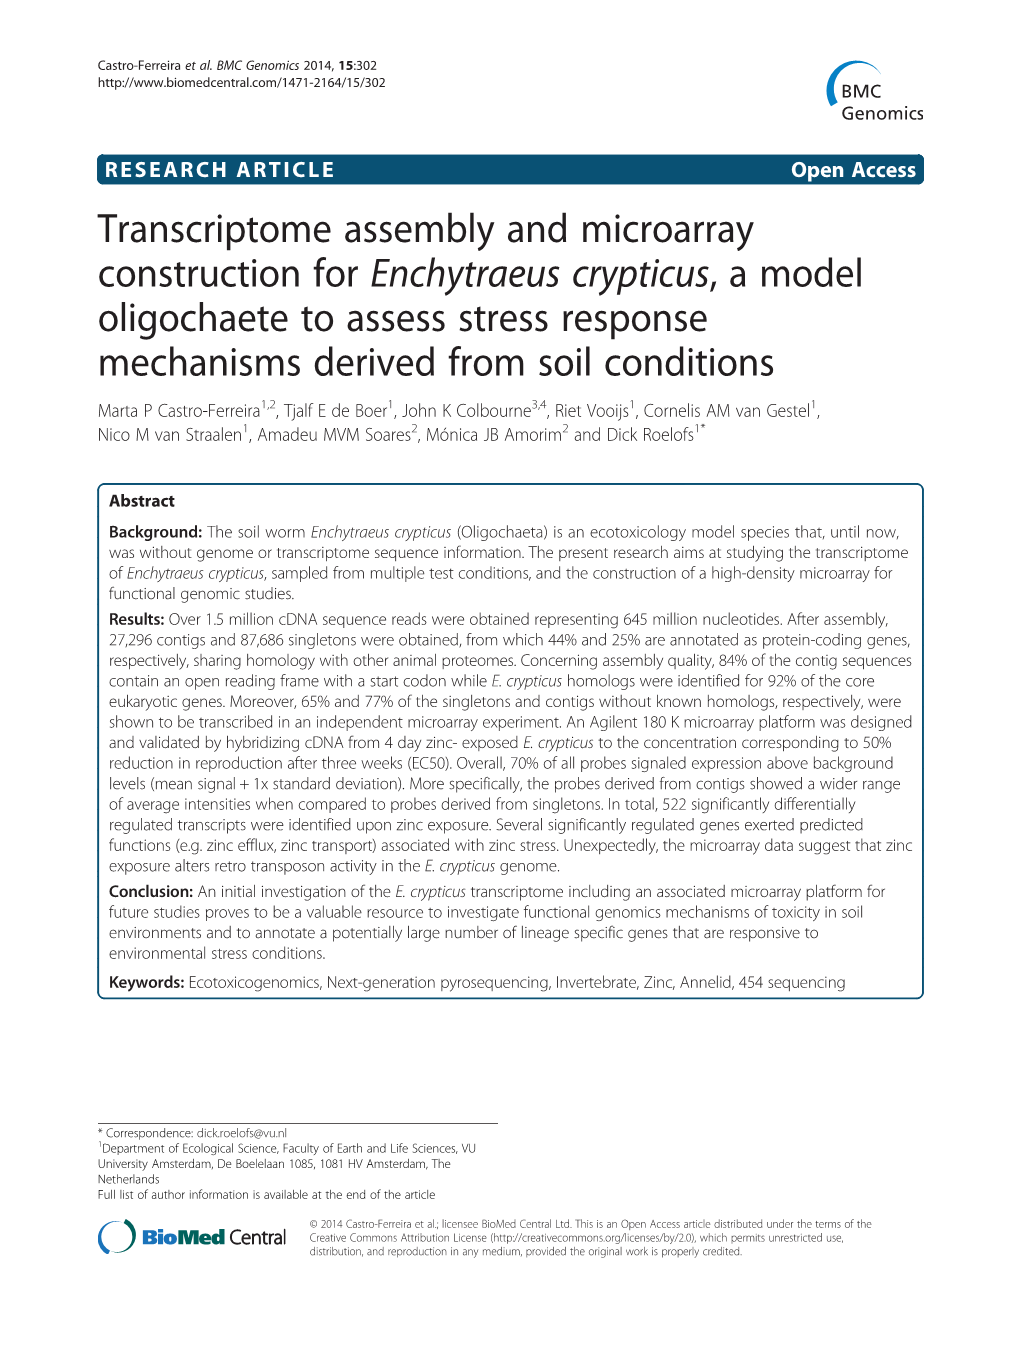 Transcriptome Assembly and Microarray Construction For